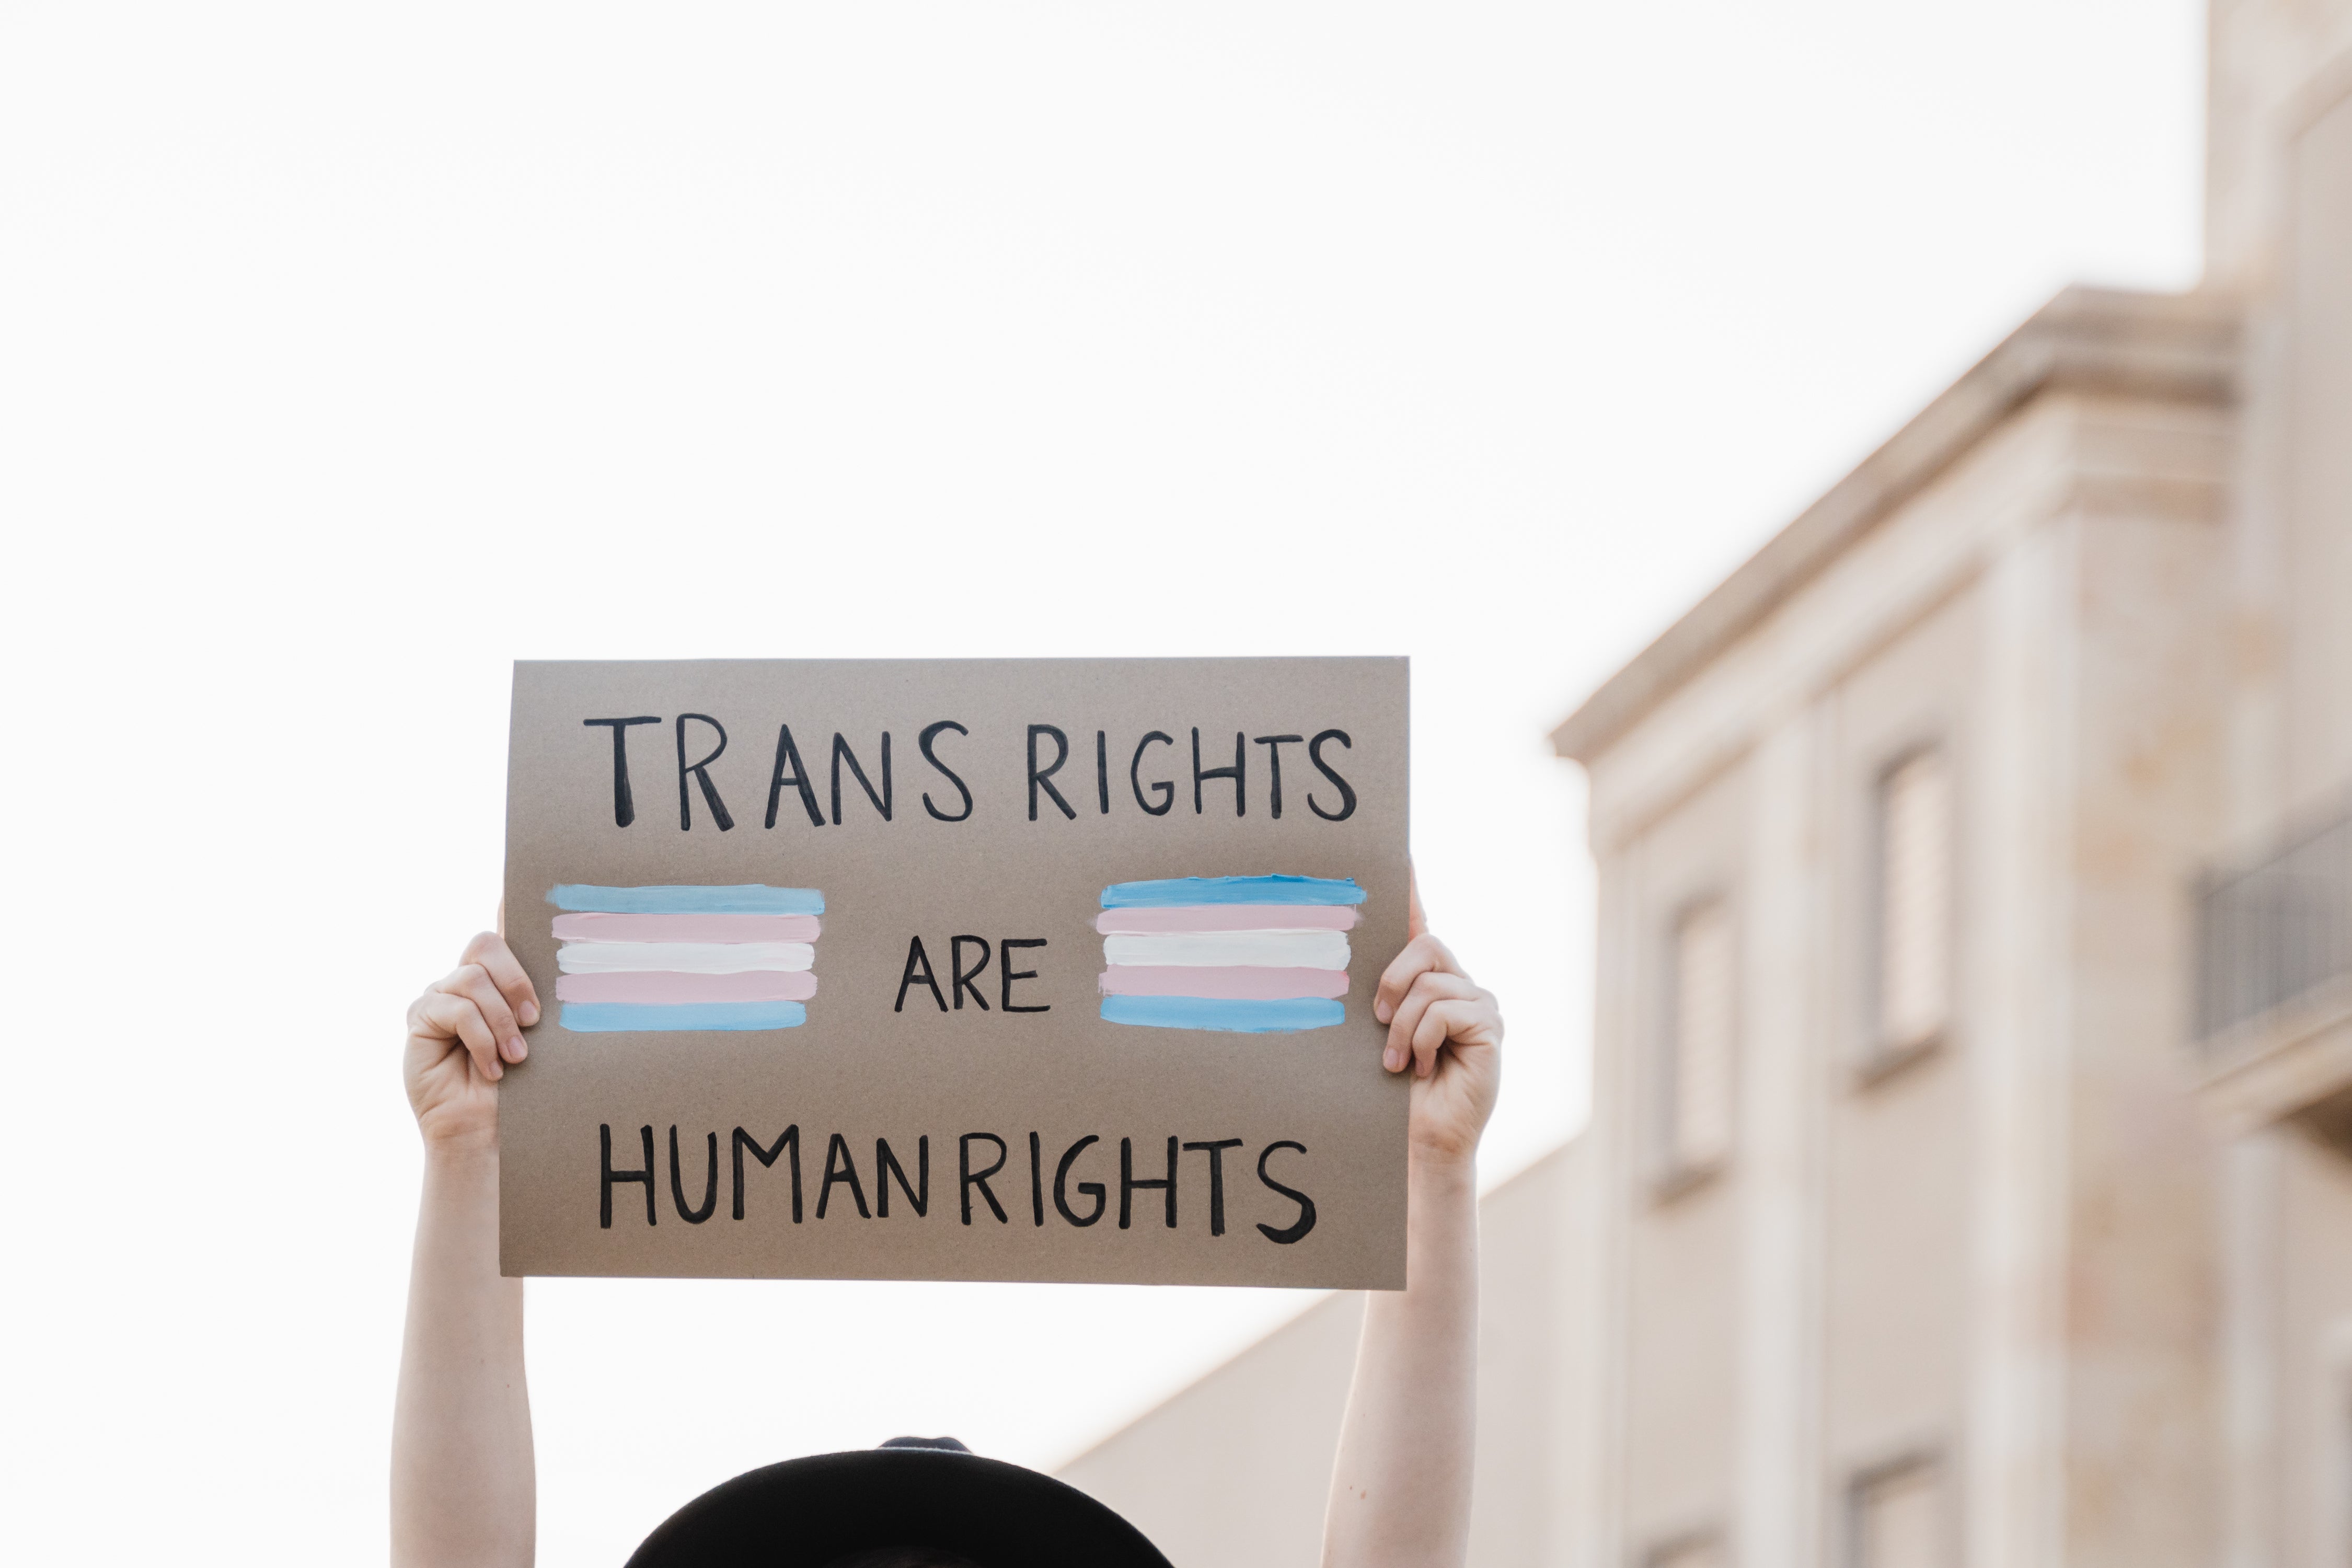 This is not the first time the government has failed trans people